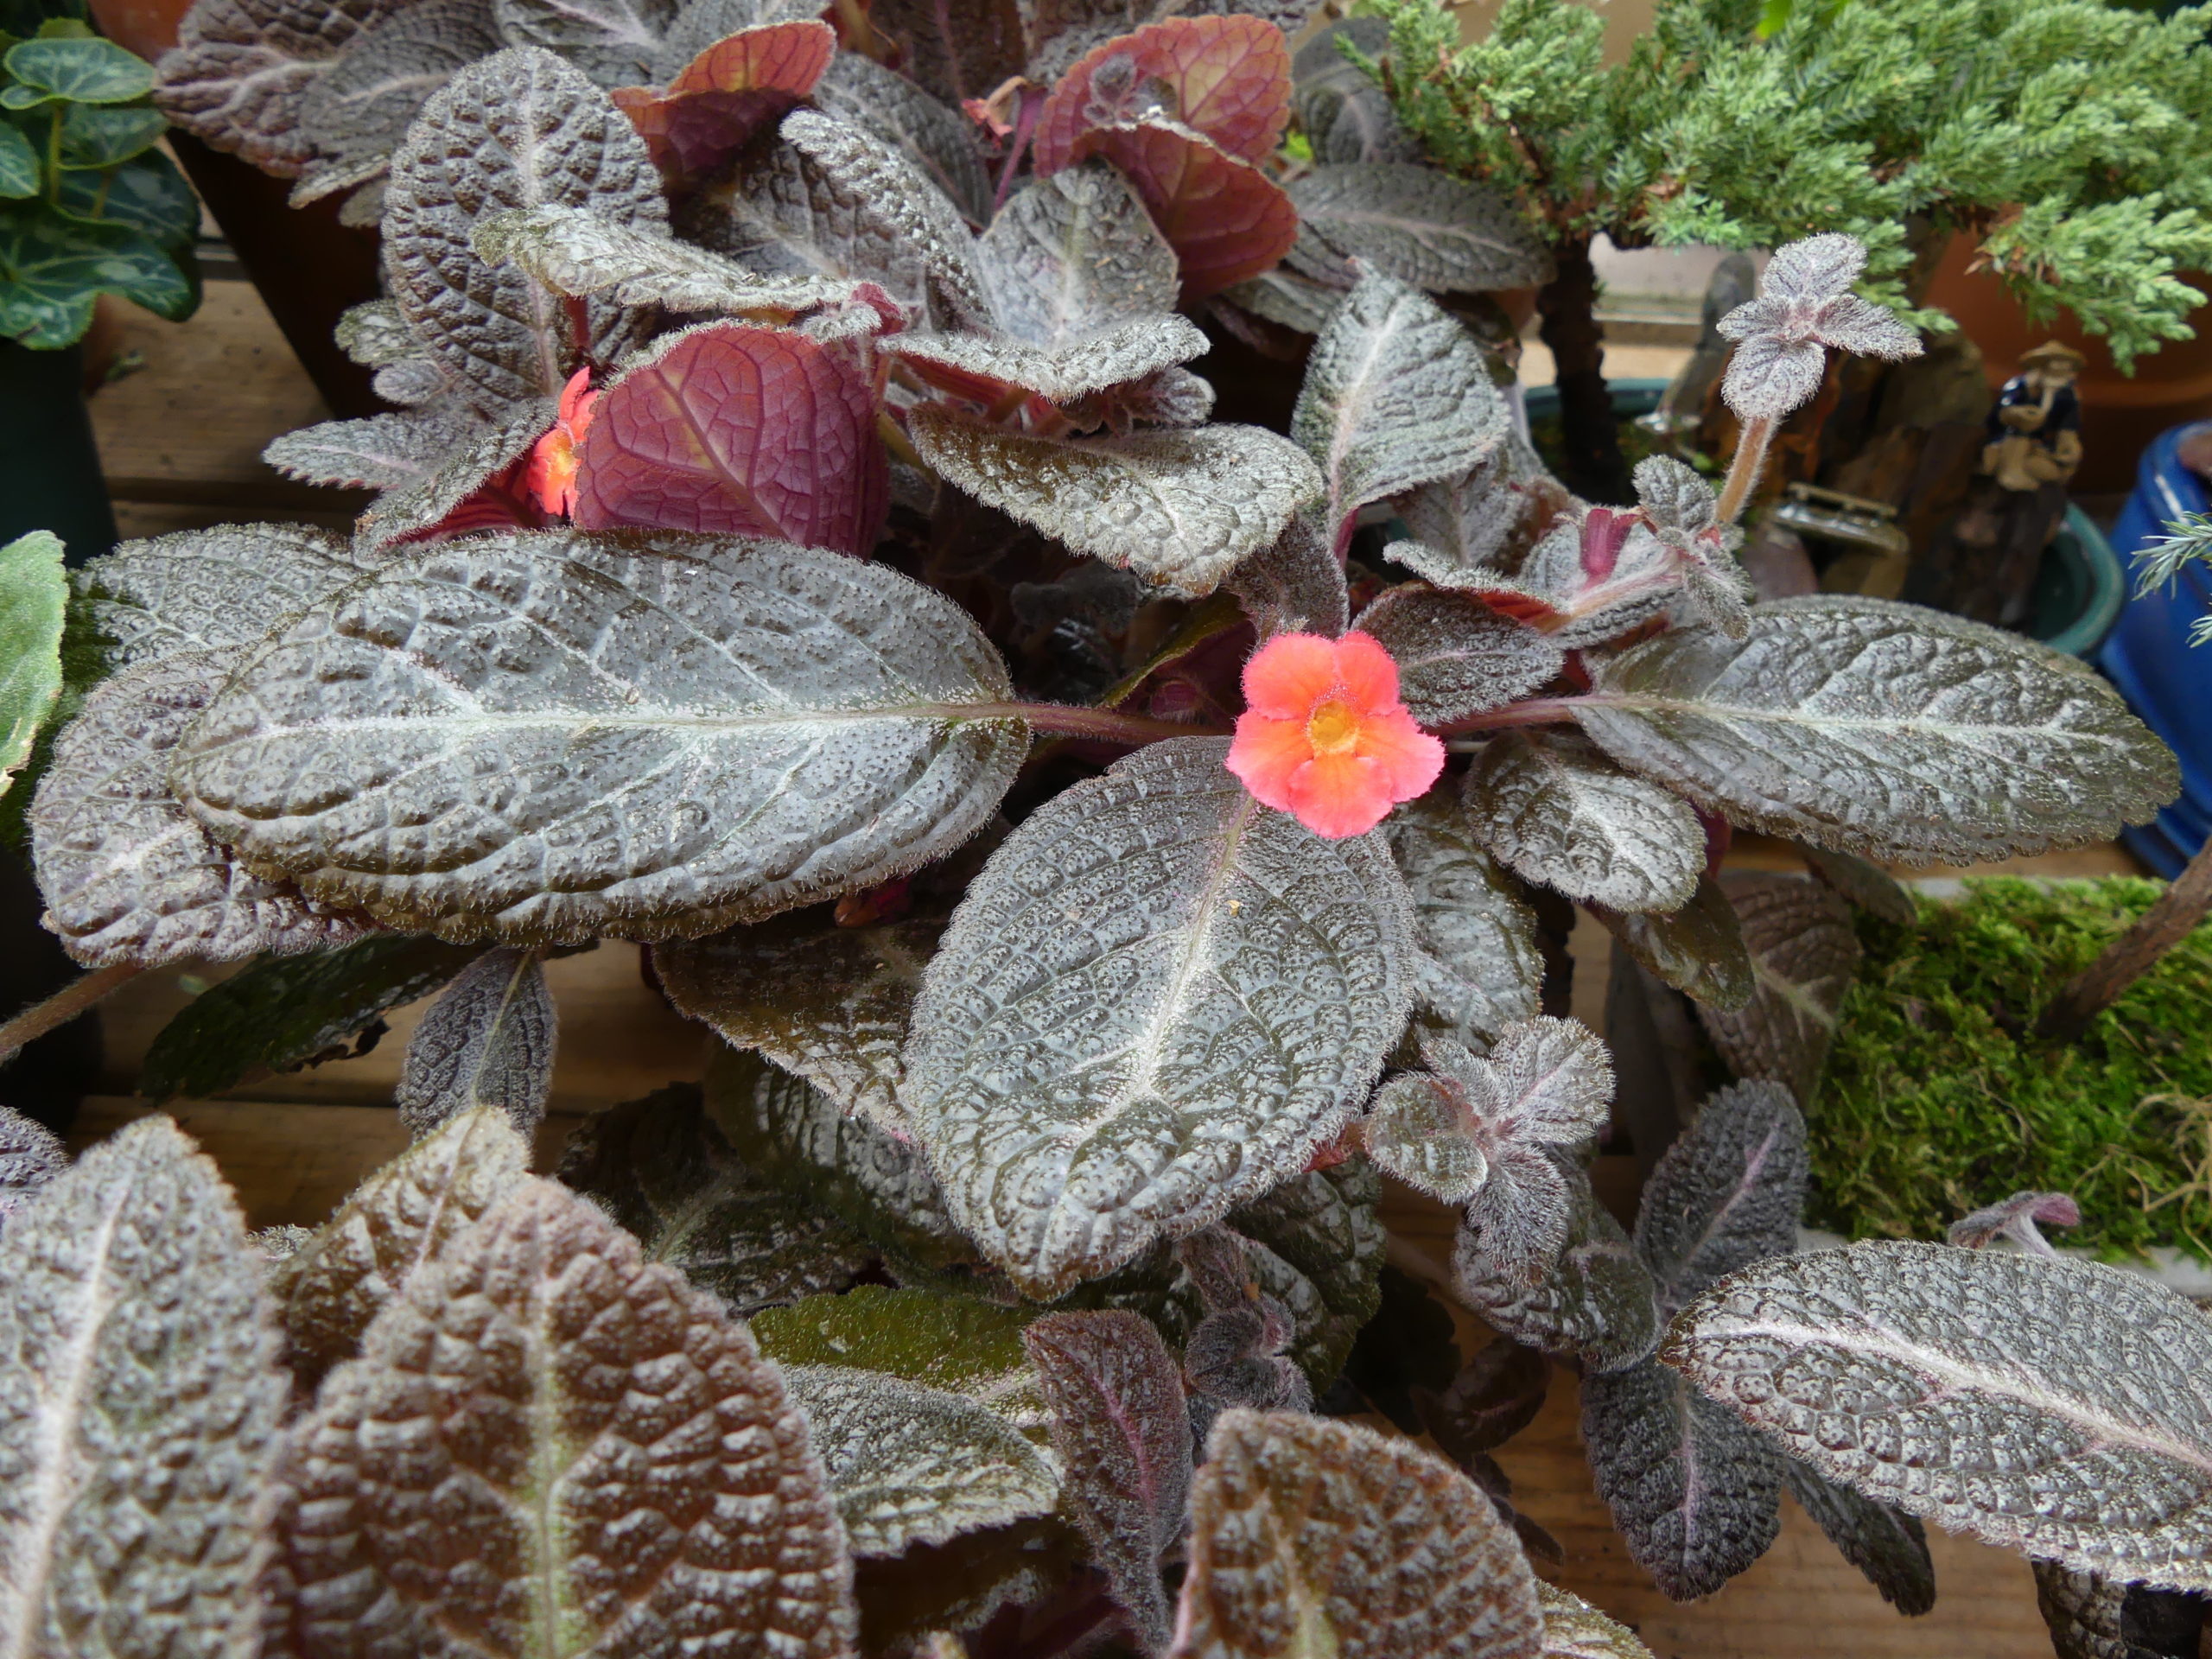 Episcias like this “Chocolate Soldier” are related to the African violet and are in the same family.  However, only accomplished indoor gardeners should try to grow Episcias as they can be as rewarding as challenging and do best in terrariums.